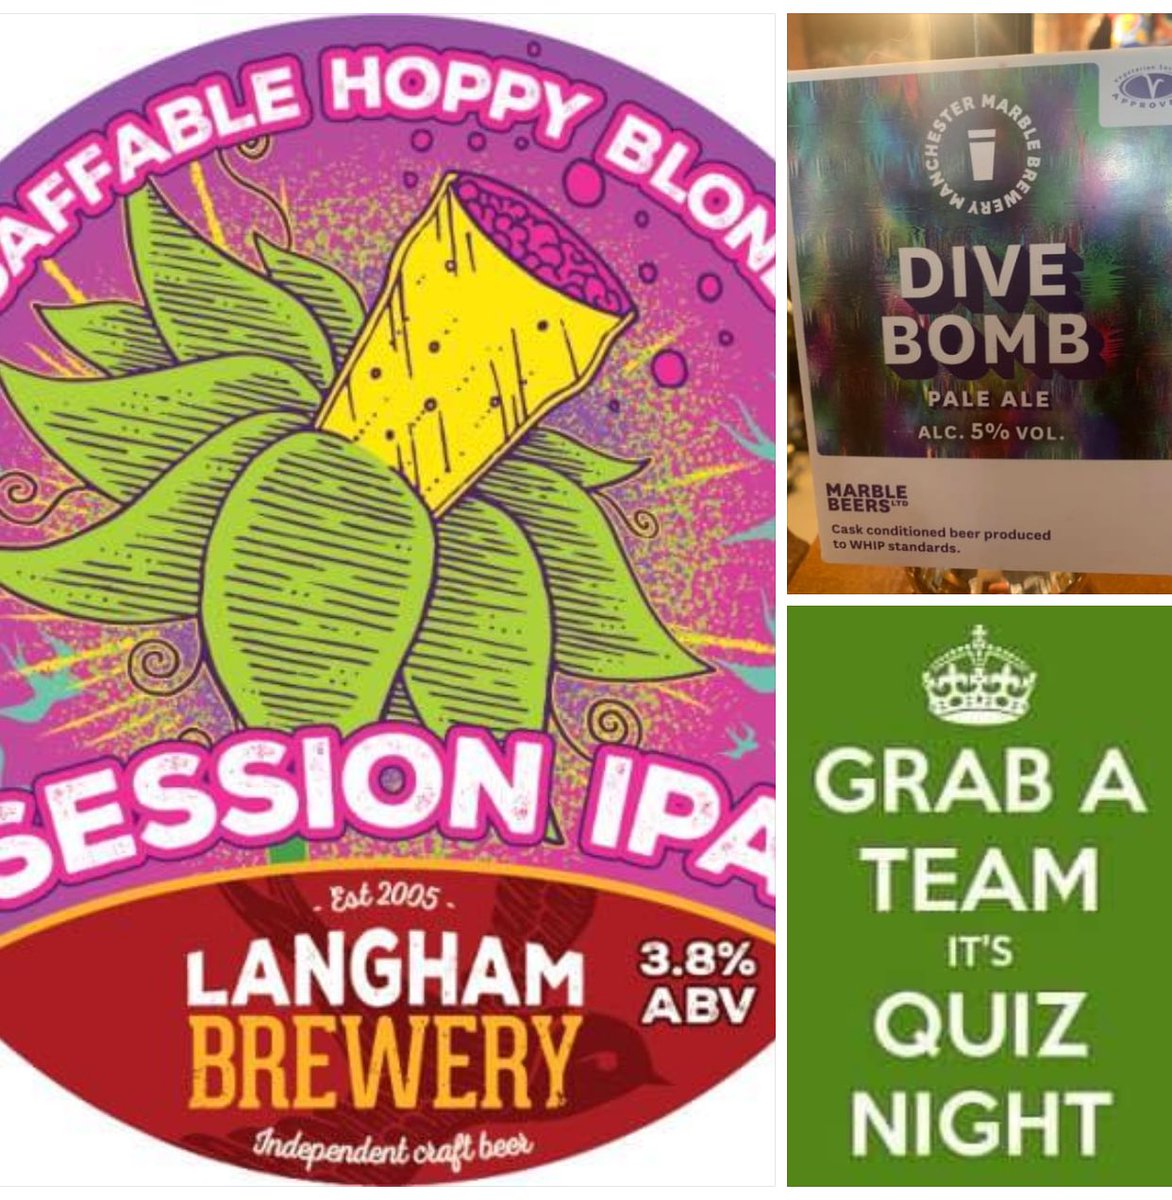 Two more fresh casks on for quiz night tonight from @LanghamBrewery and @marblebrewers 😊 Dive Bomb is crafted with Crystal malts, Mosaic, and Centennial hops, it’s a flavour journey that hits all the right notes. Discover the harmony of hops in every sip